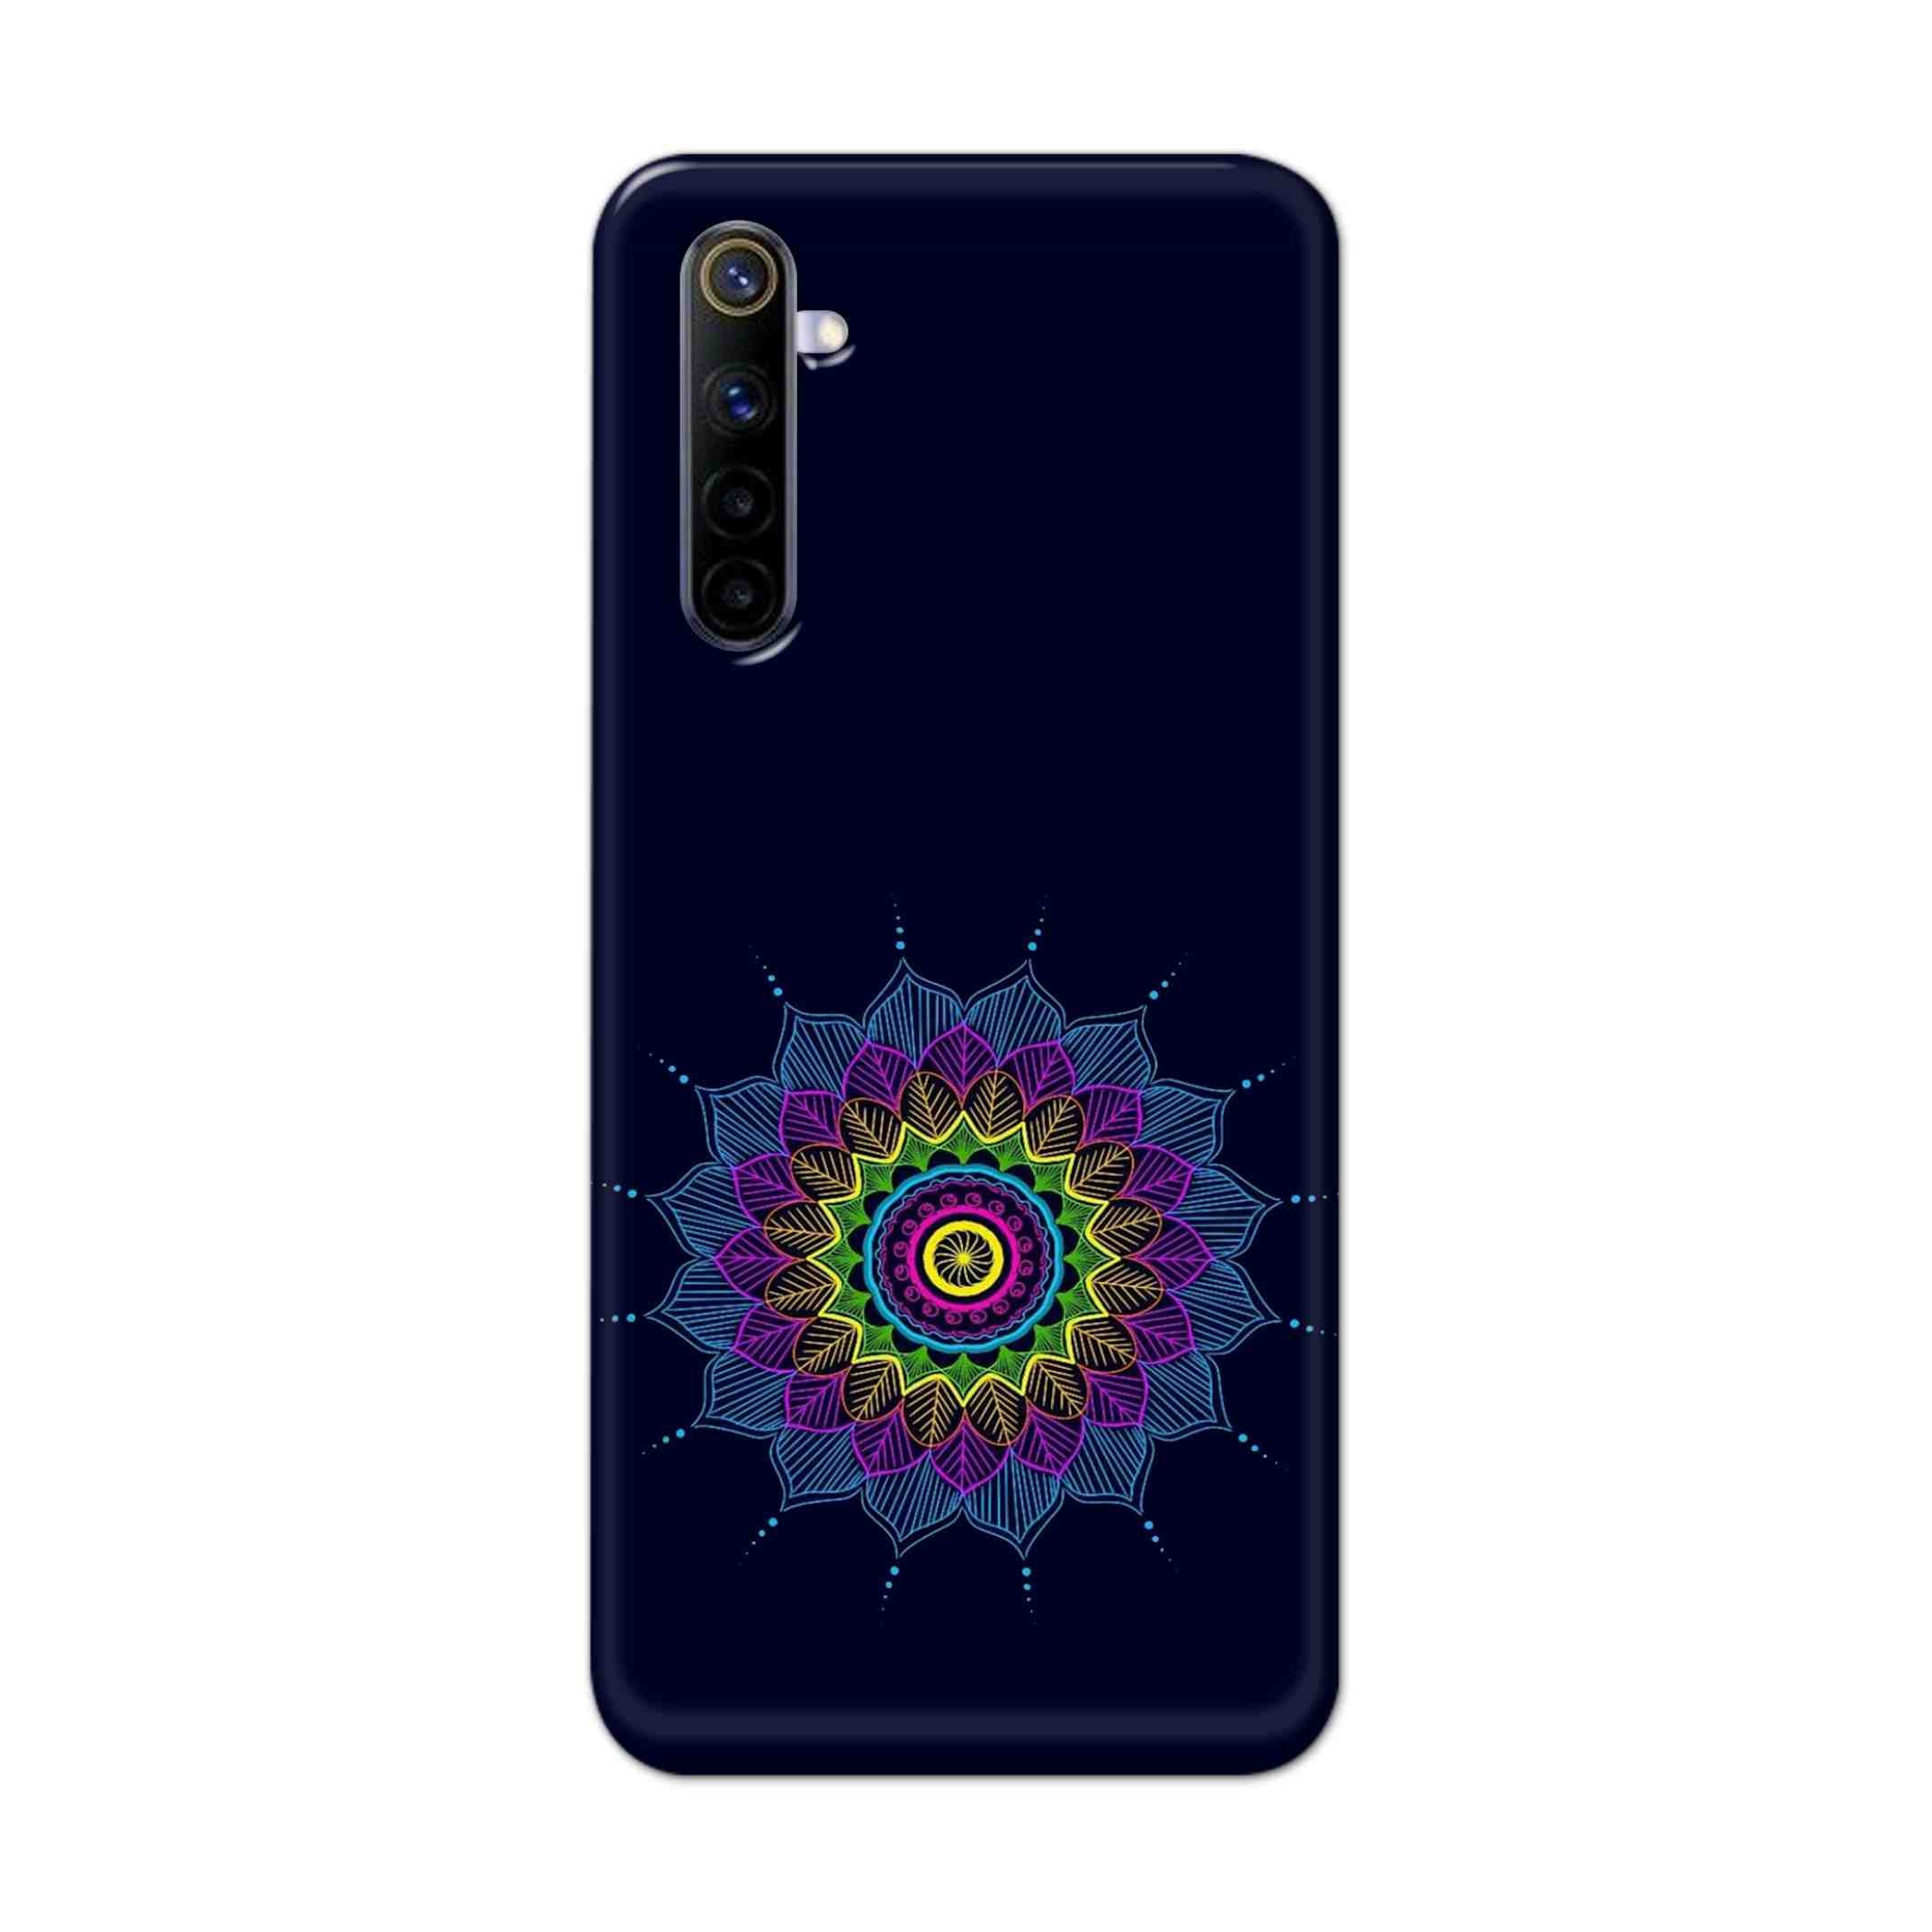 Buy Jung And Mandalas Hard Back Mobile Phone Case Cover For REALME 6 PRO Online